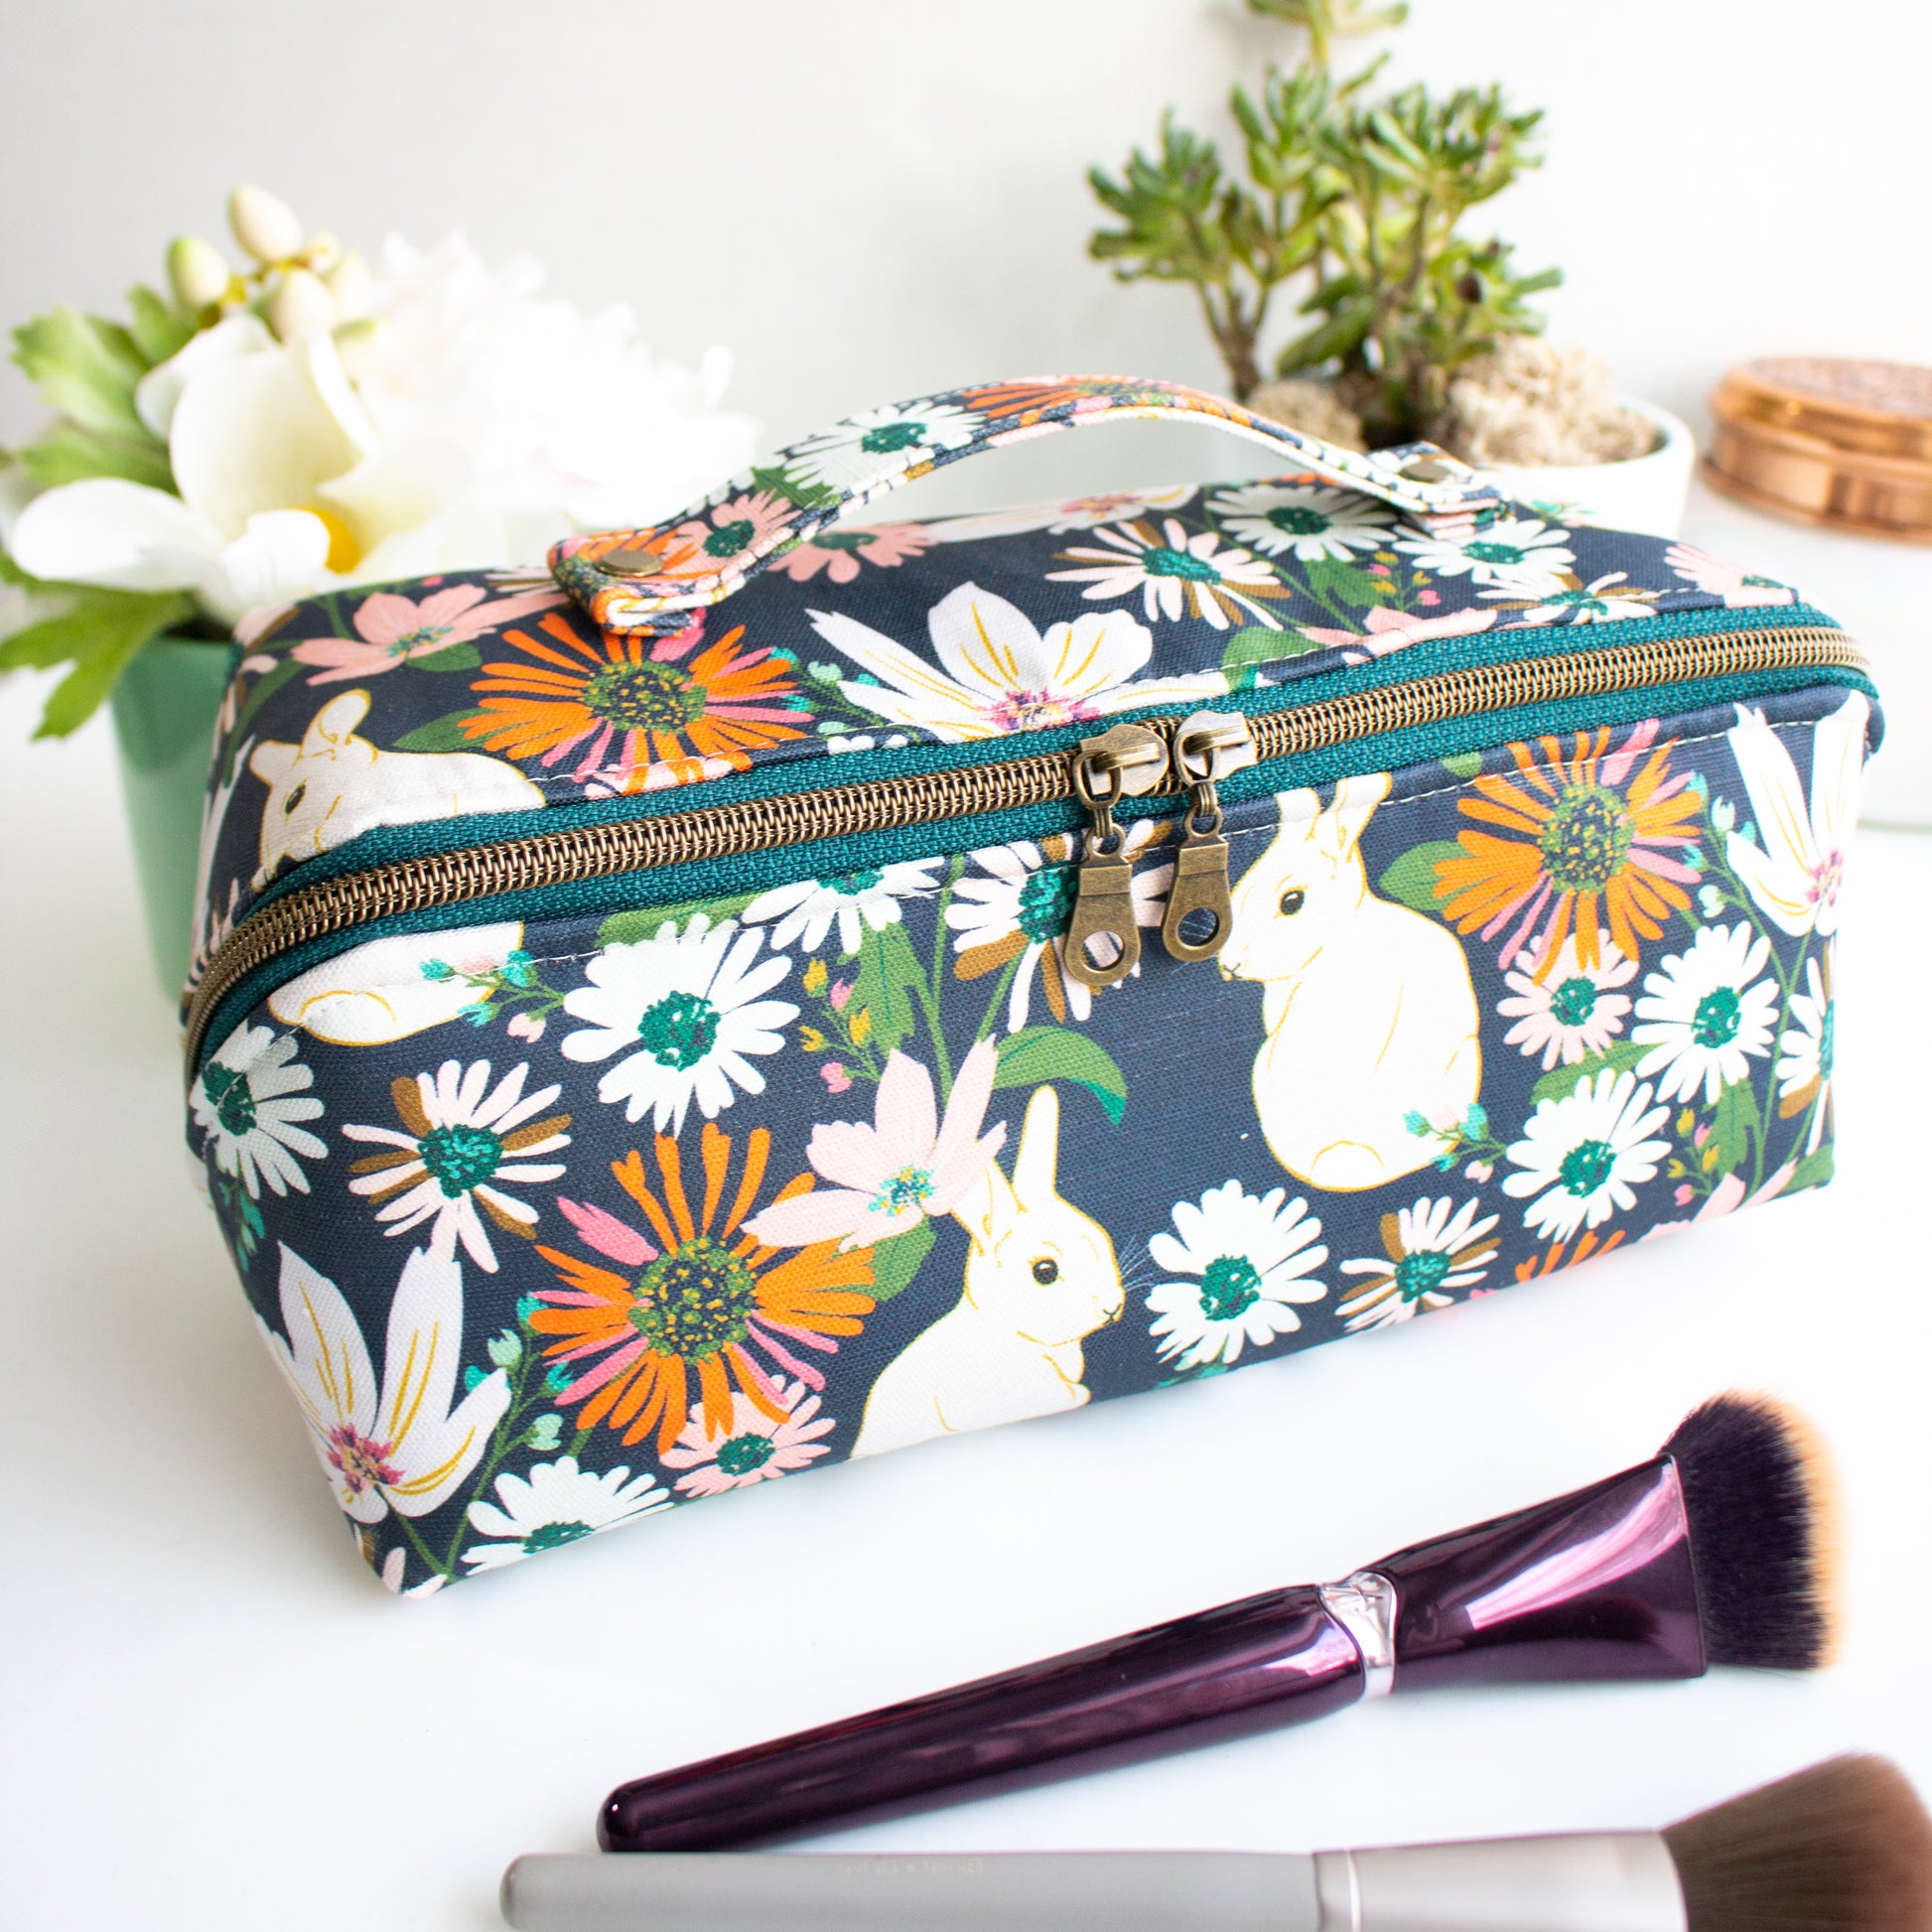 Kinds of Sewing Kit for Travel - China Sewing Kit and Sewing Set price